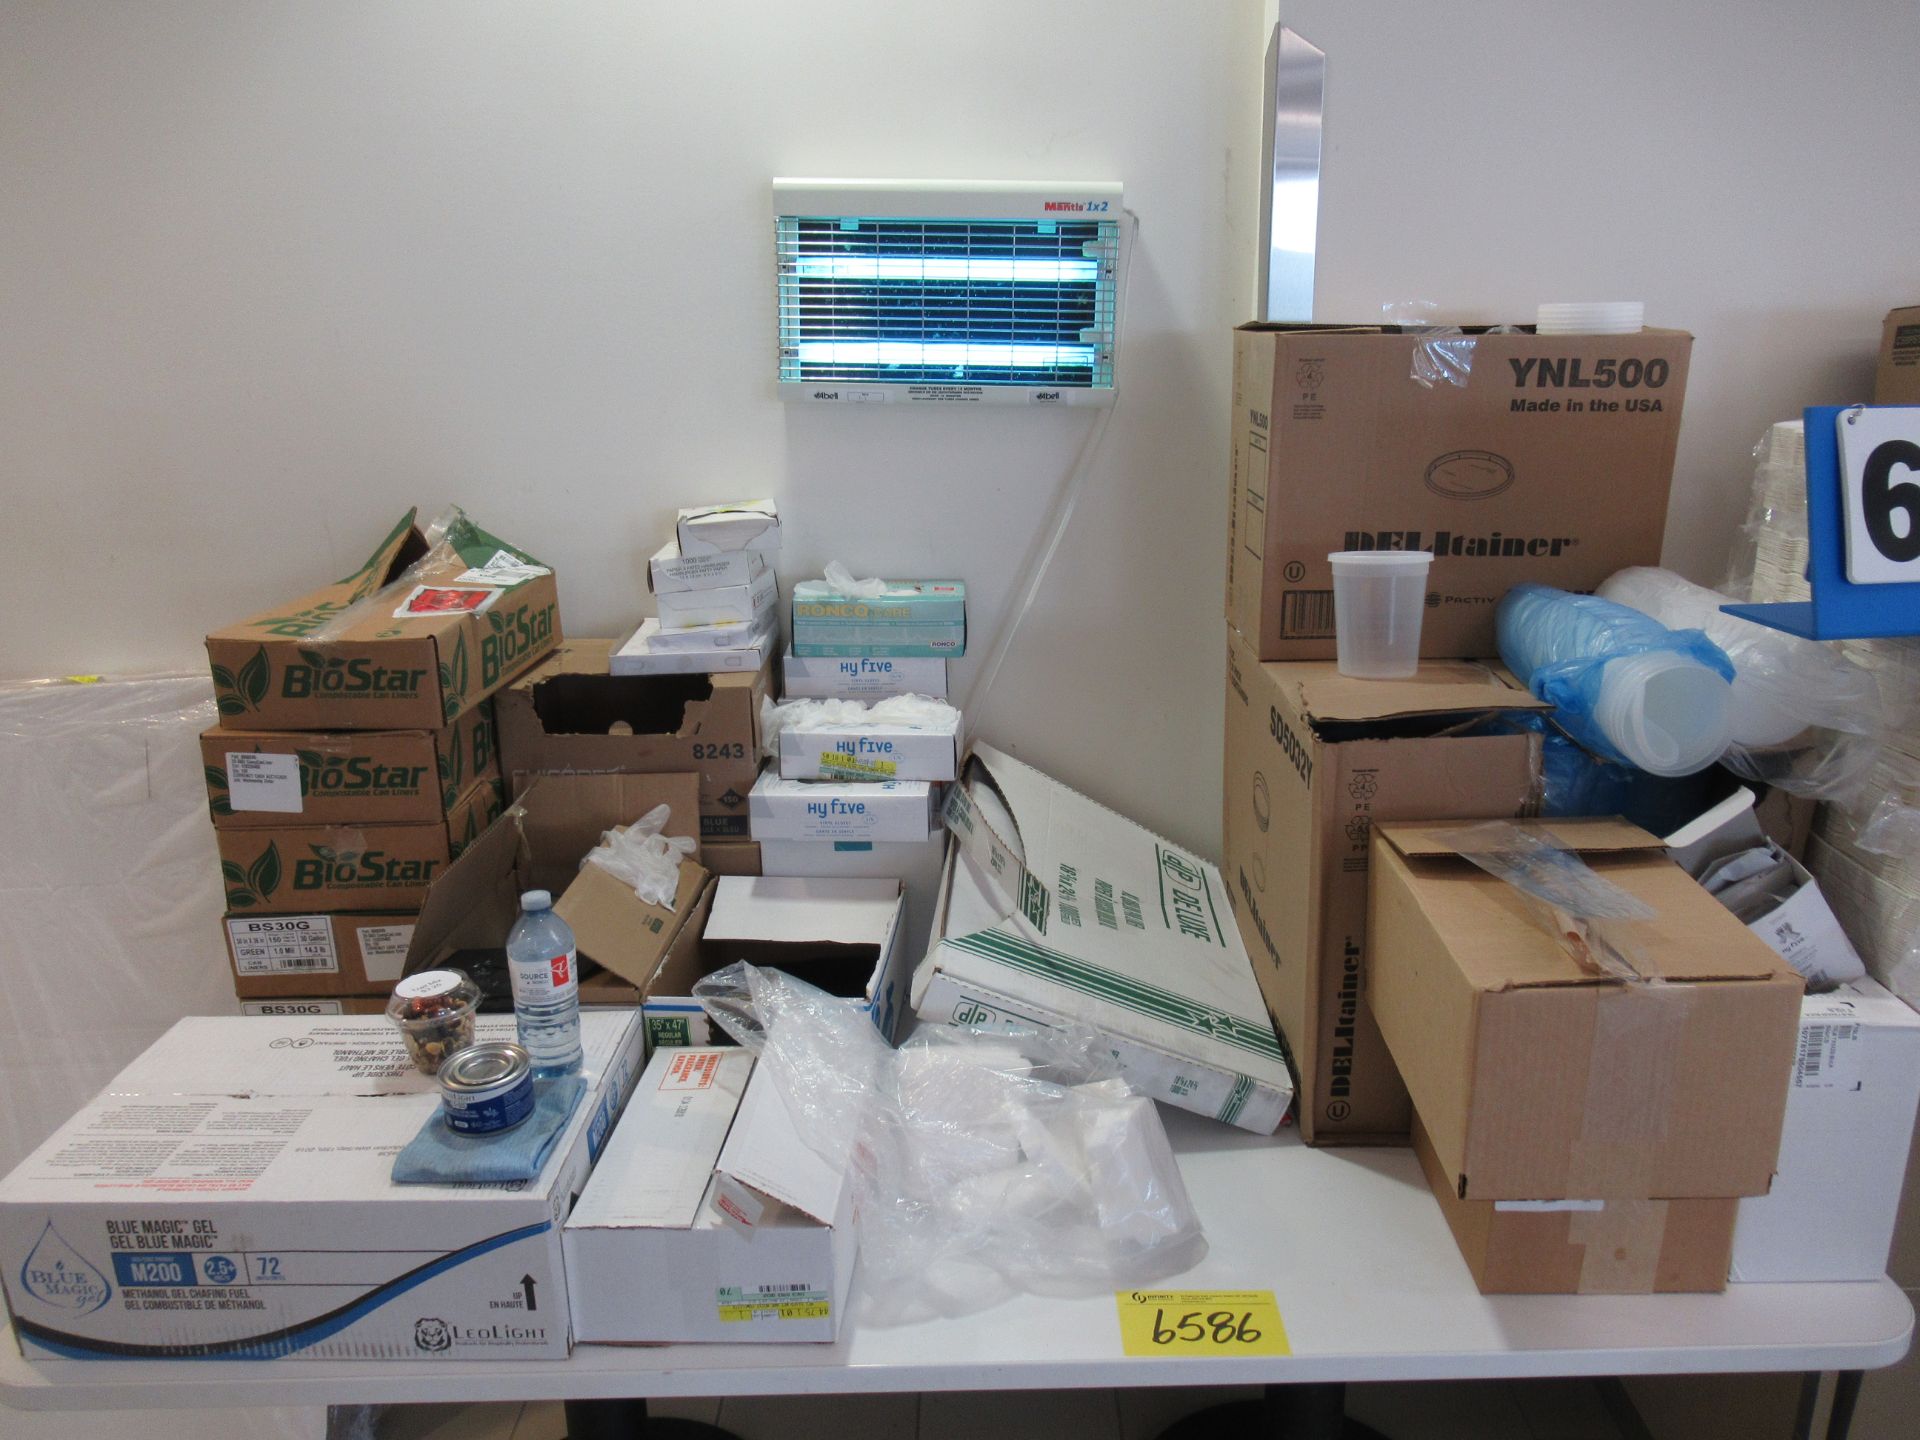 LOT OF ASSORTED TAKE OUT CONTAINERS (PIZZA BOXES, CHAFFING FUEL, GLOVES, WASTE BAGS, ETC) (REUTER) - Image 2 of 4